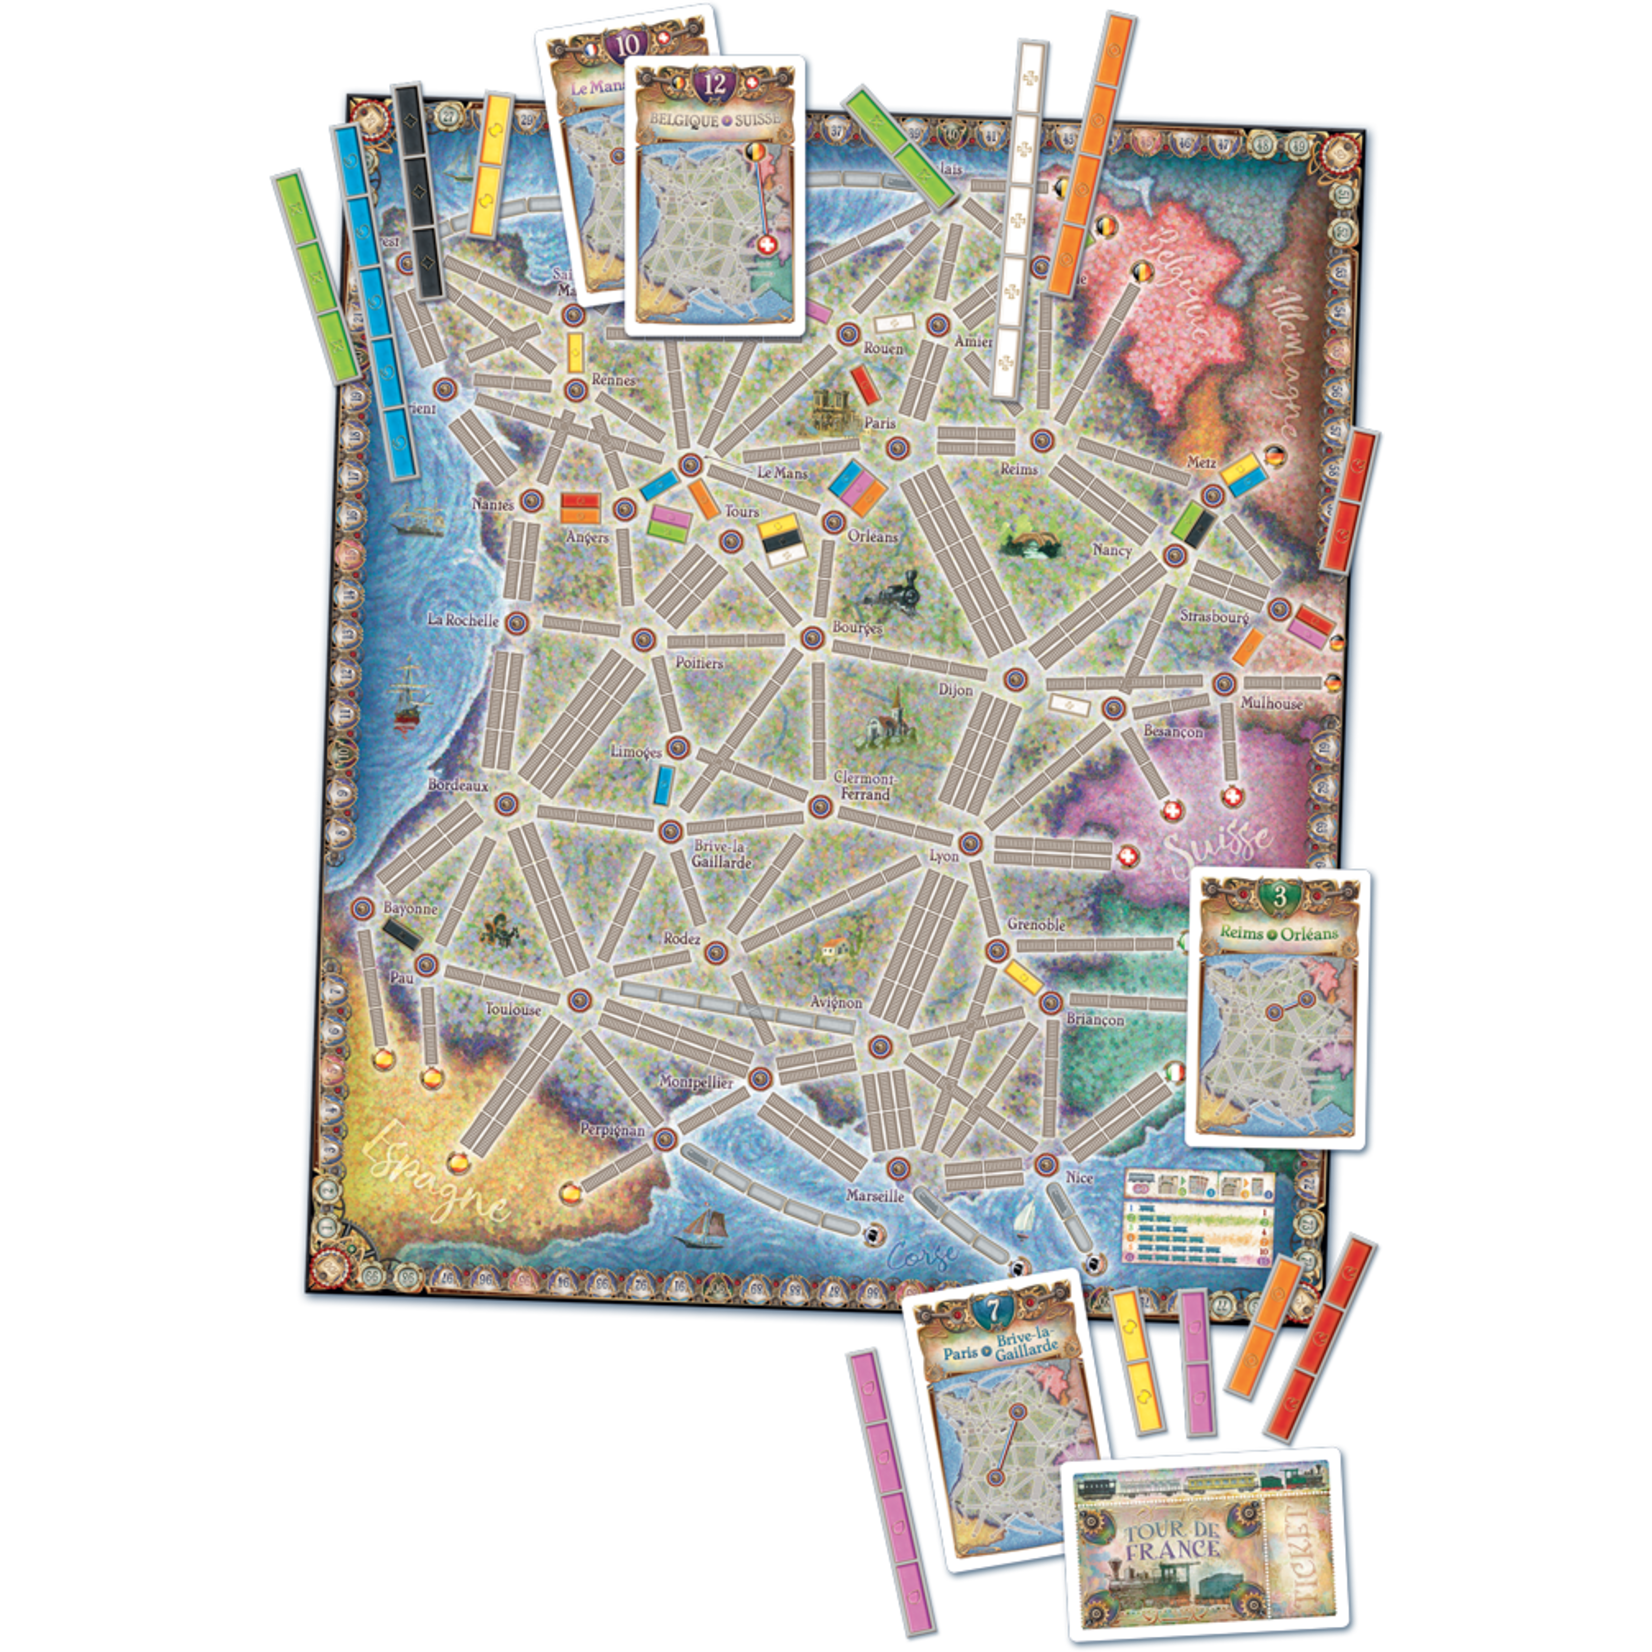  Ticket to Ride France + Old West Board Game EXPANSION